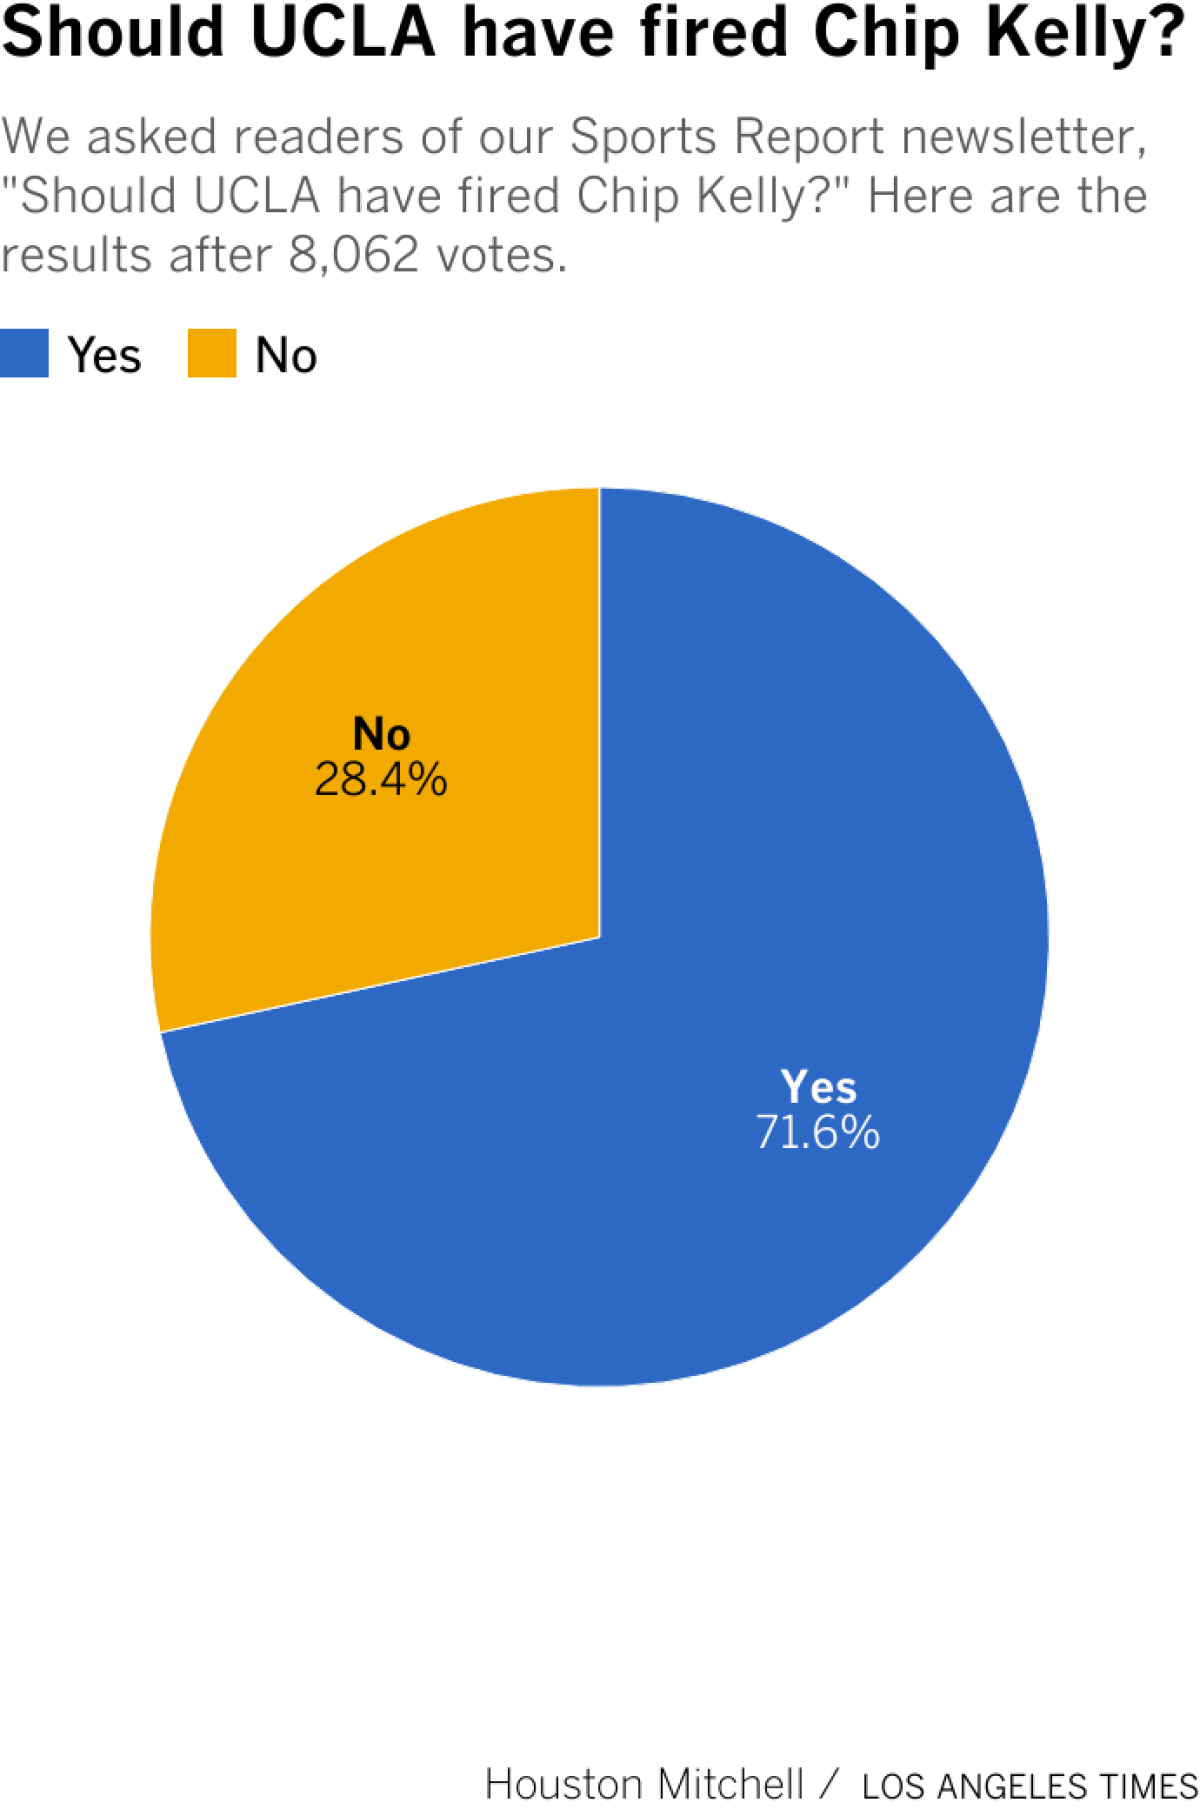 We asked readers of our Sports Report newsletter, "Should UCLA have fired Chip Kelly?" Here are the results after 8,062 votes.